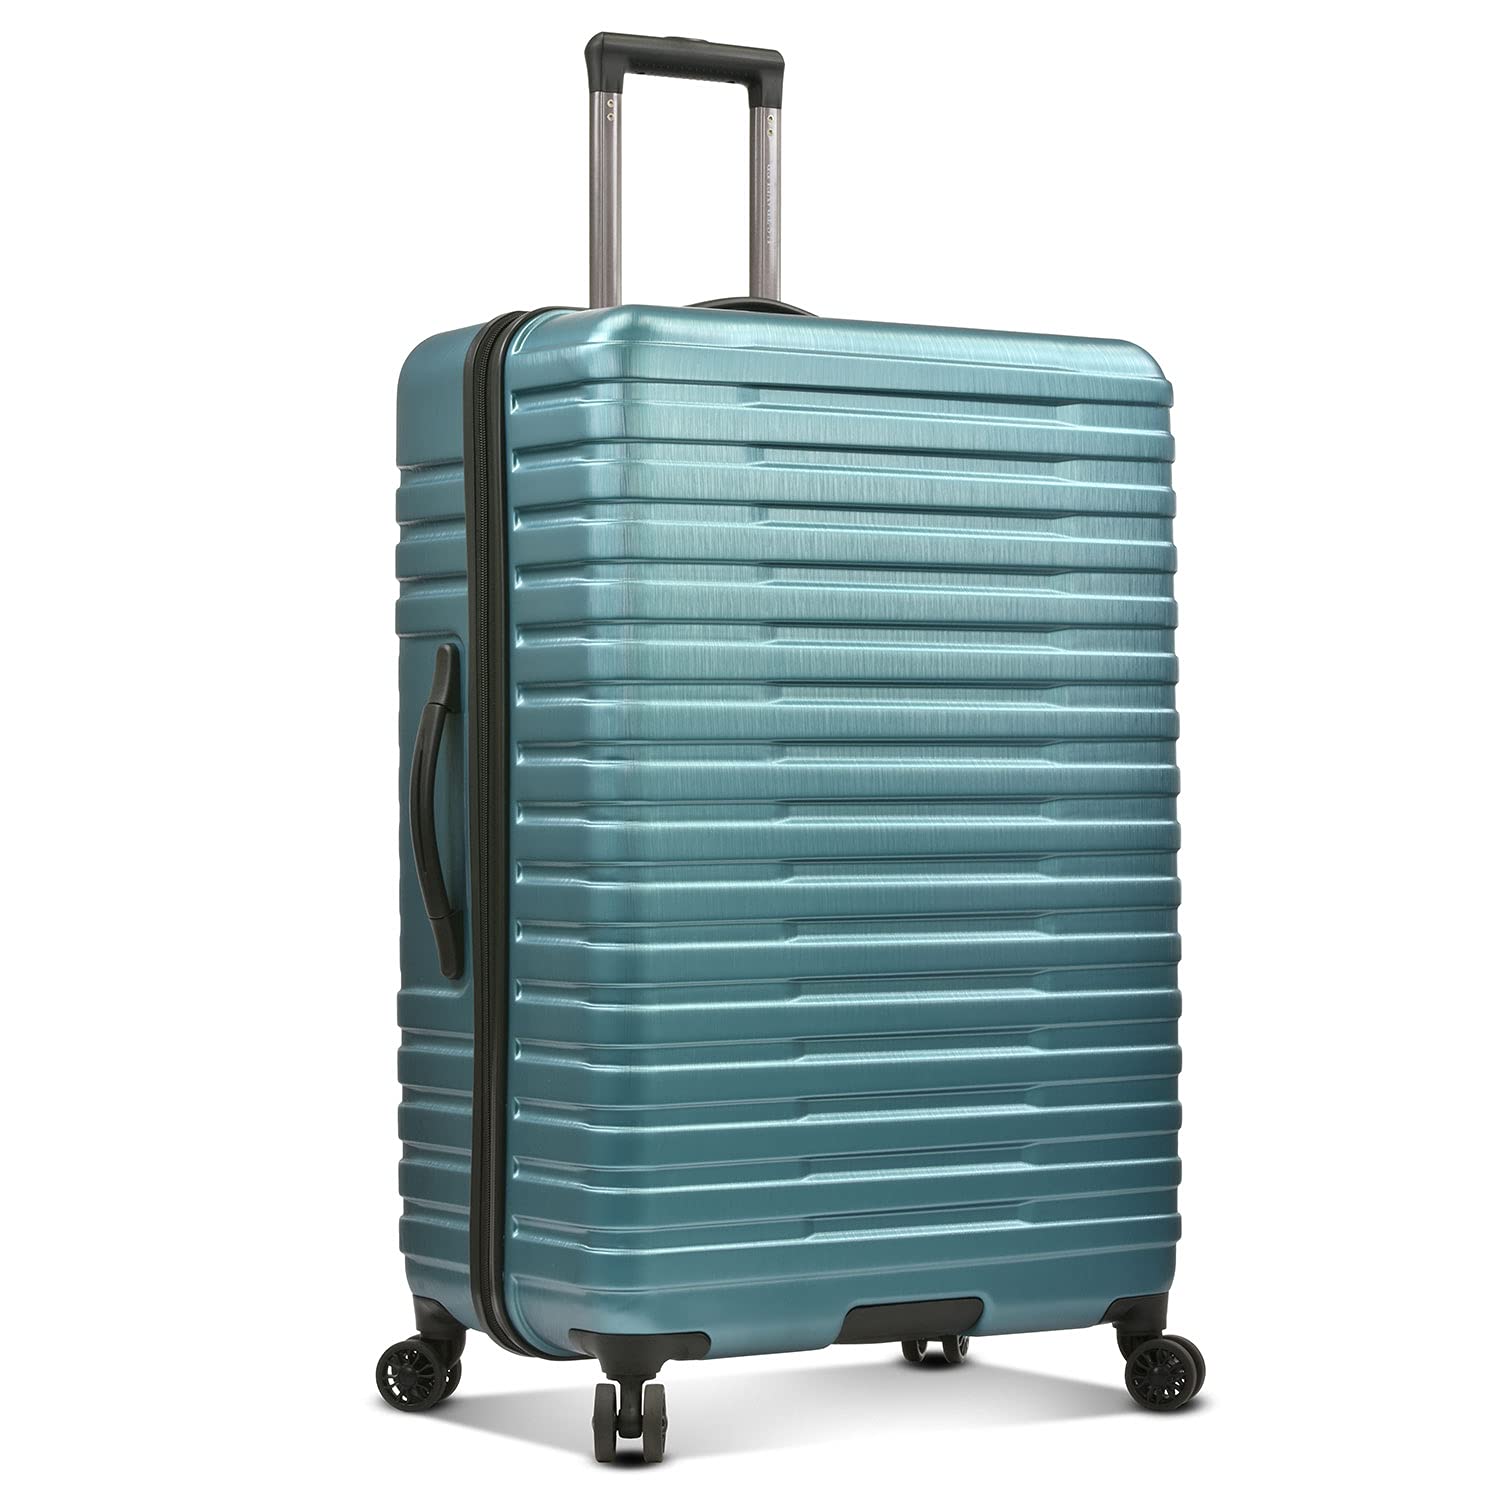 U.S. Traveler Boren Polycarbonate Hardside Rugged Travel Suitcase Luggage with 8 Spinner Wheels, Aluminum Handle, Teal, Checked-Large 30-Inch